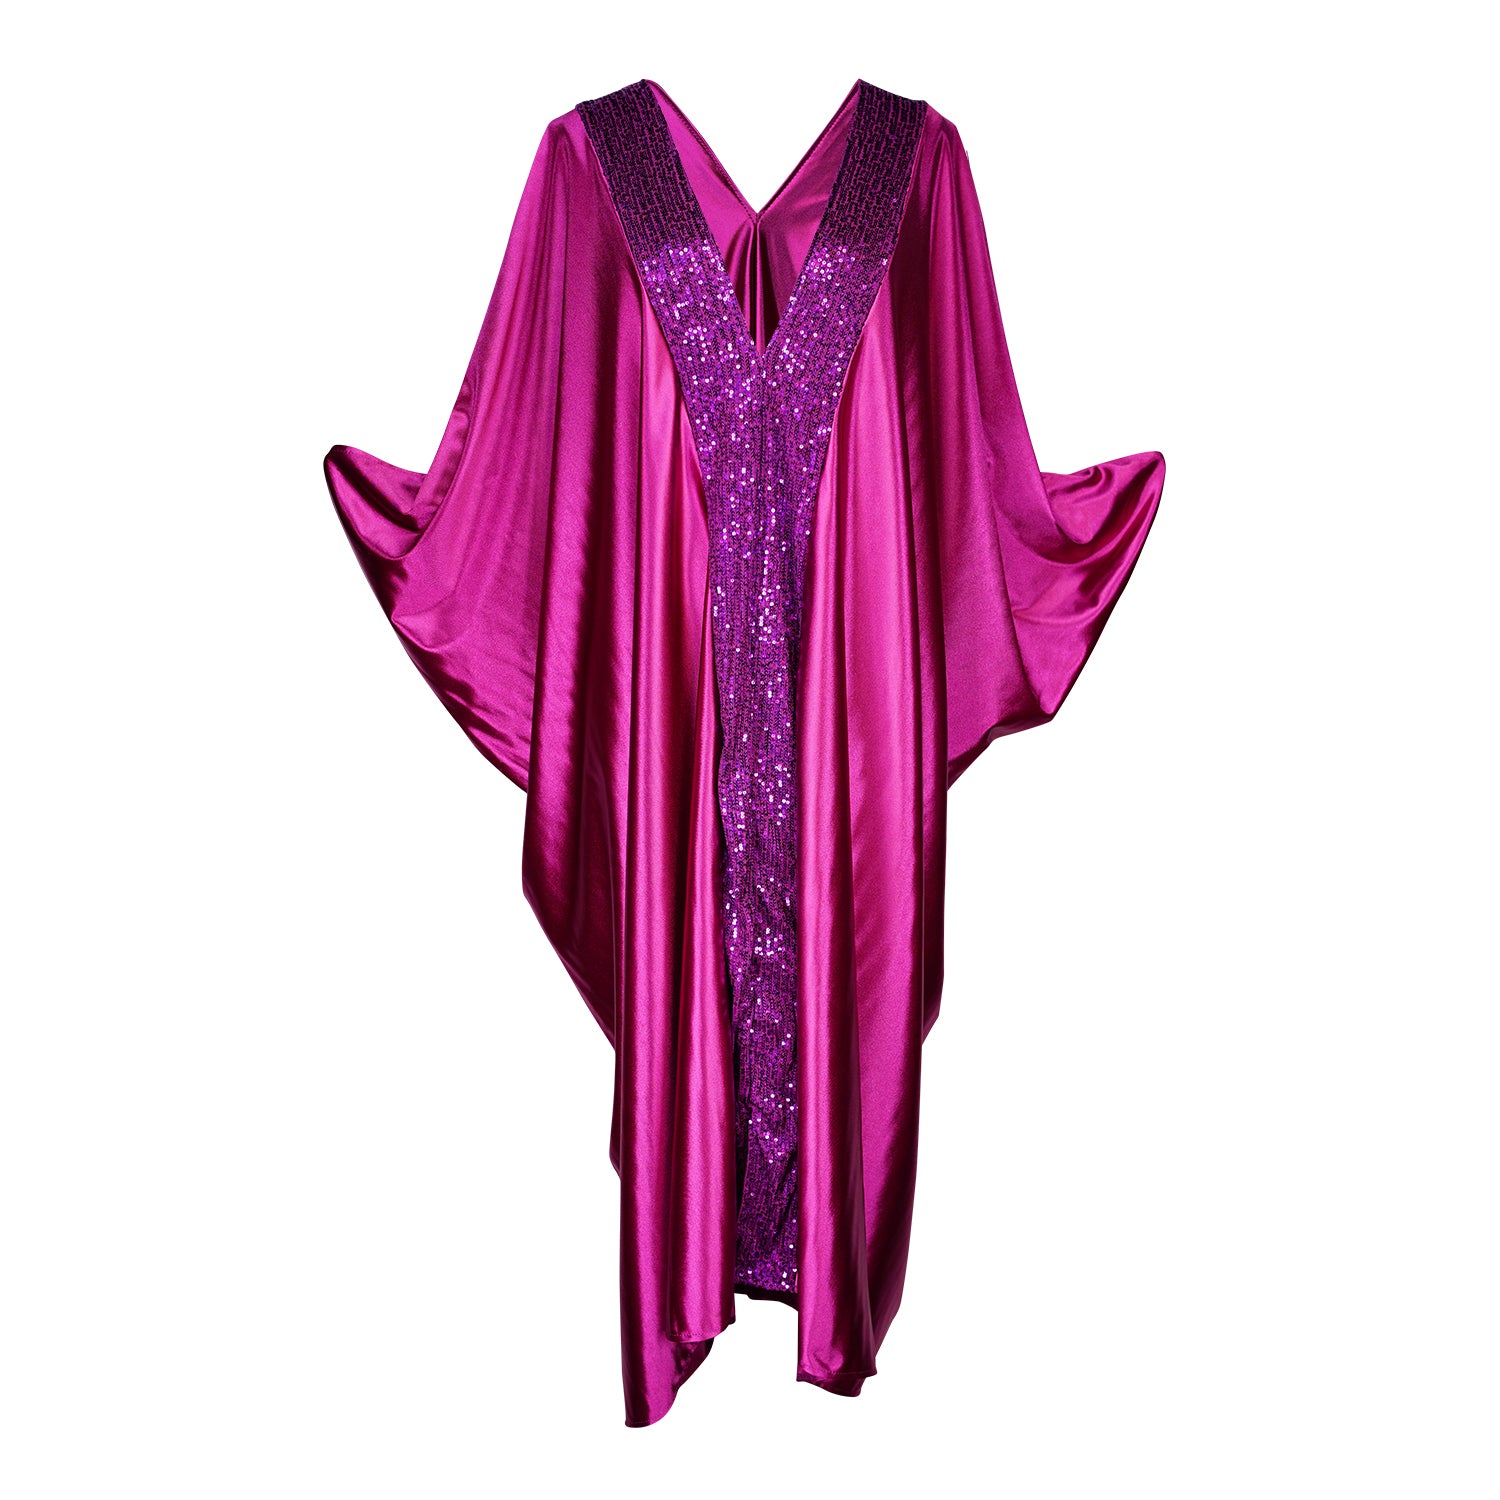 Hot pink raspberry fuchsia caftan crafted with a slinky disco stretch jersey with thick, centered, vertical border stripe of matching fuchsia sequins. Featuring a v-neck at front and back, with half, batwing sleeves and a full length hem. This caftan is a bold, colorful, glittering statement piece reminiscent of the era of Studio 54 and the glam of the 70s.